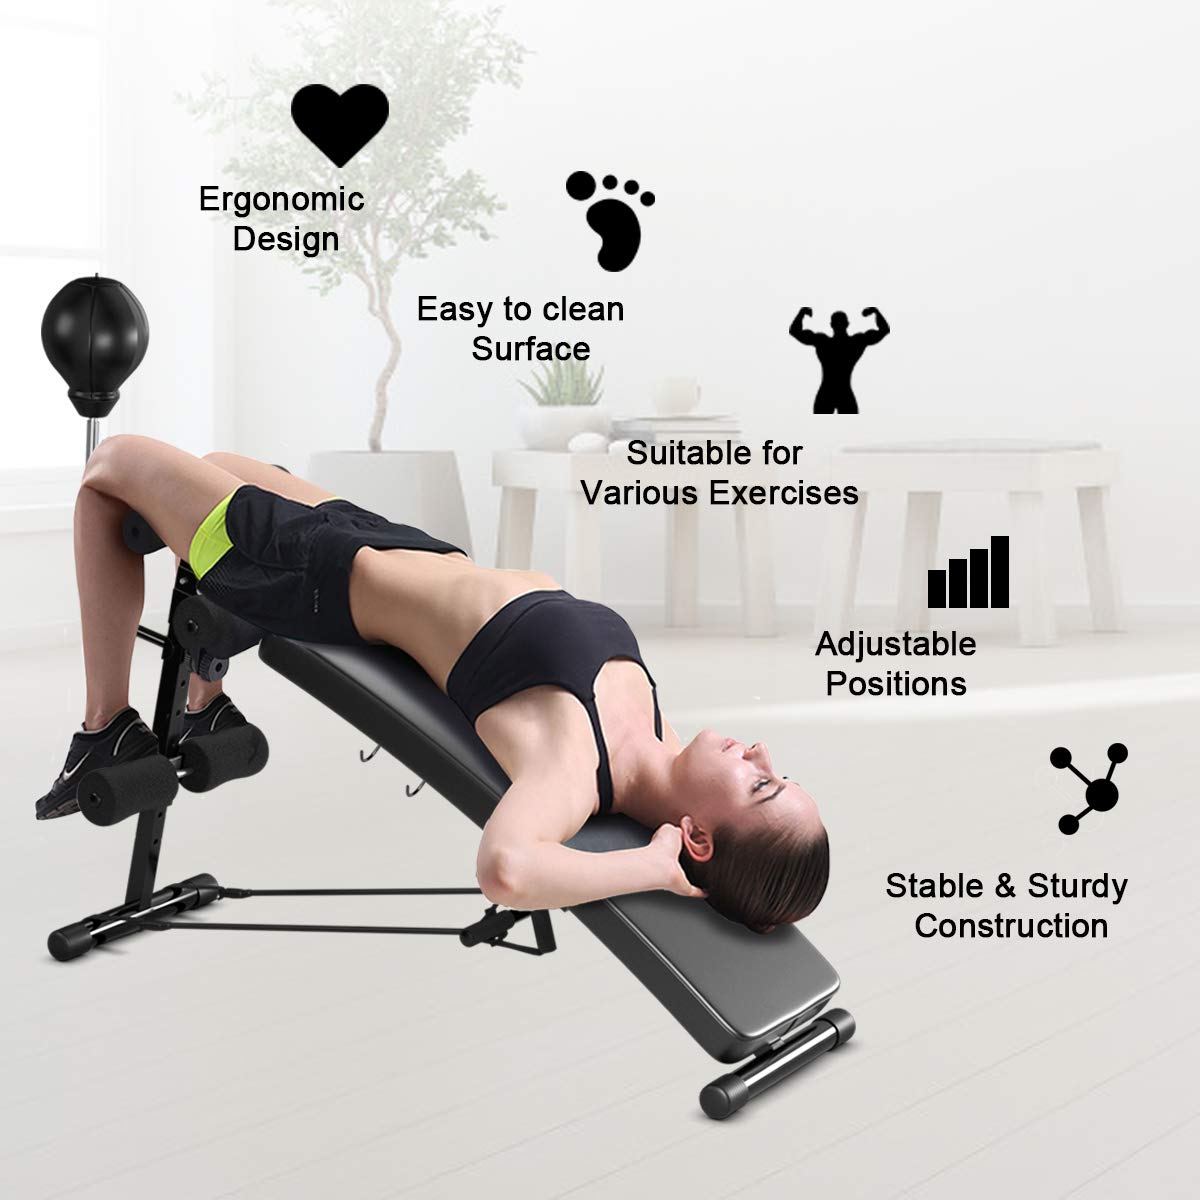 Goplus Adjustable Sit Up Bench, Decline Curved Slant Ab Bench Crunch Board with Speed Ball (Black)